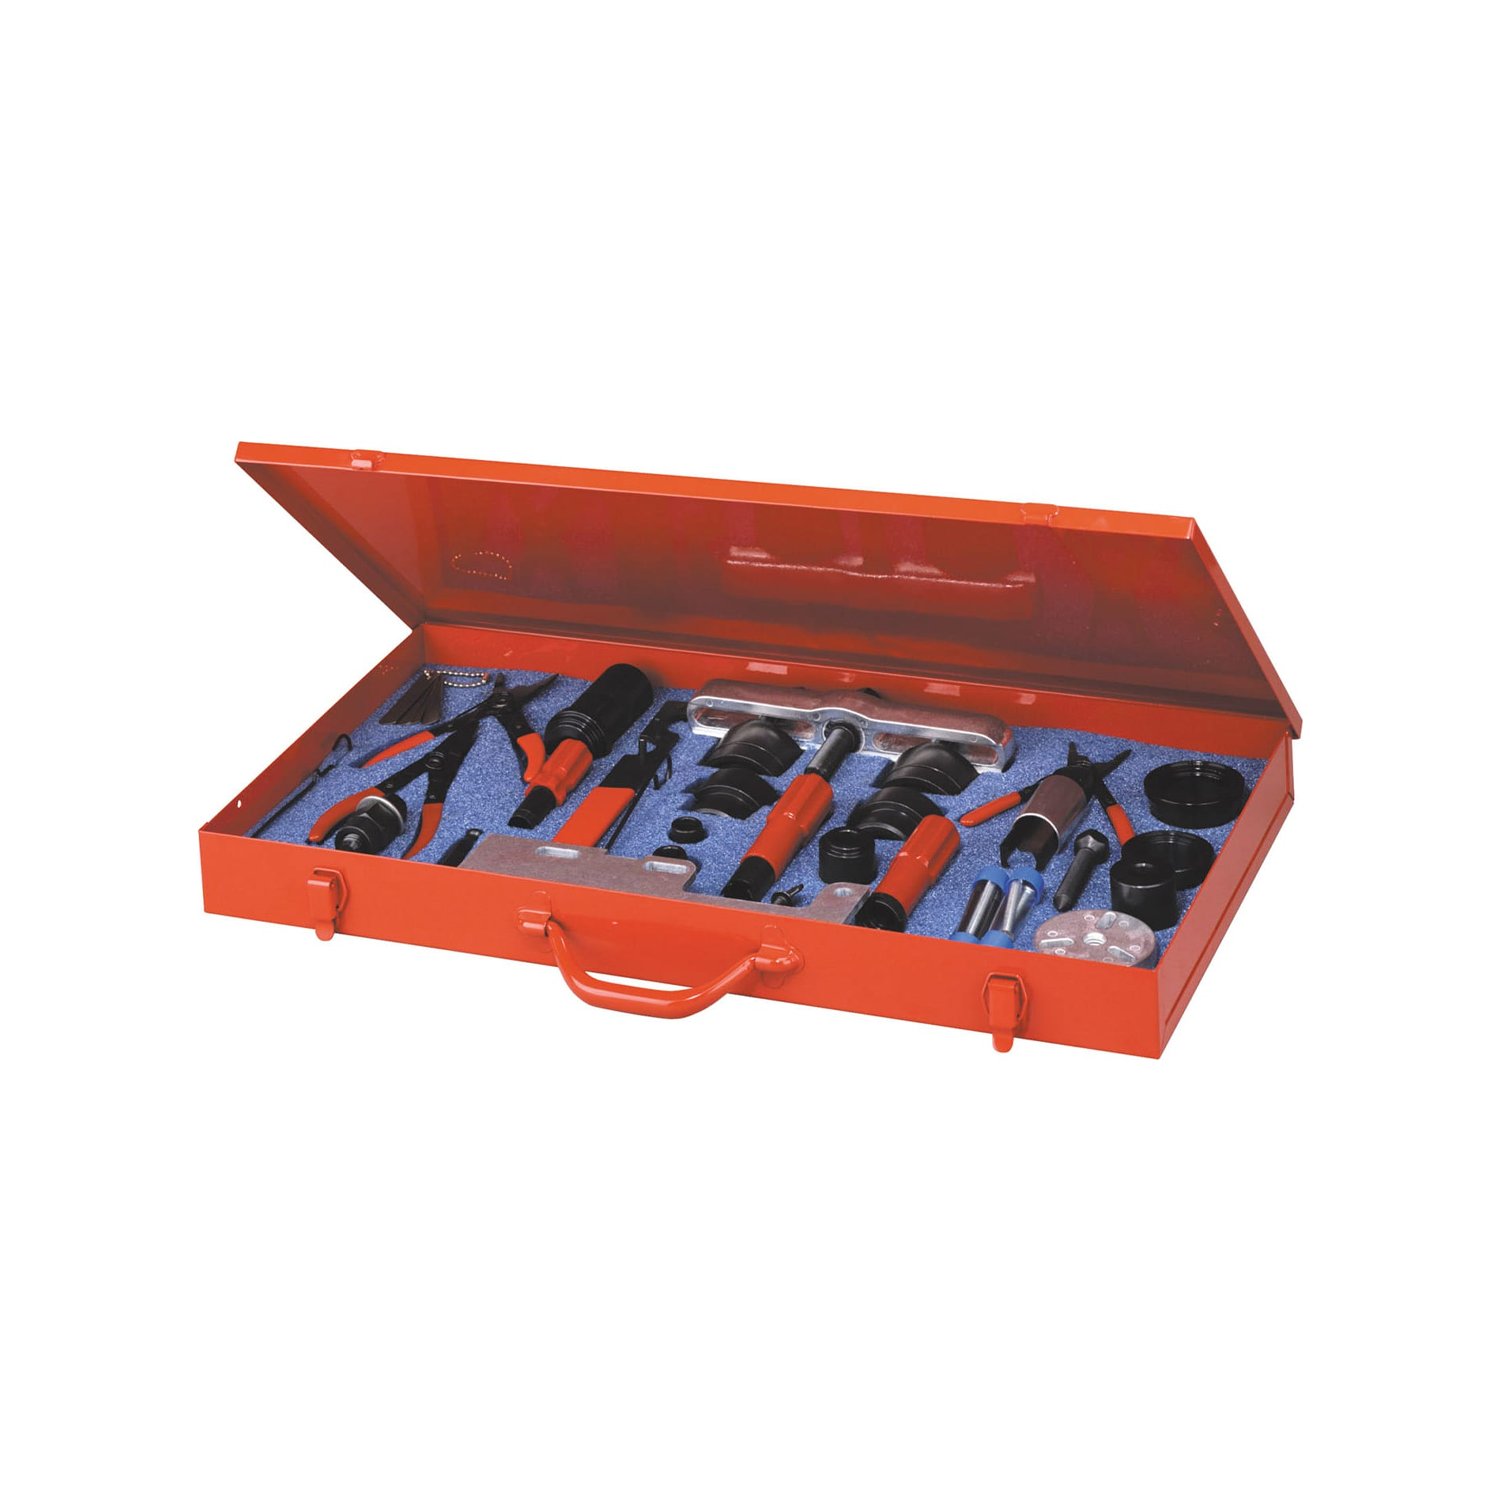 Gasket & coupling tool set for foreign makes (without tool box)